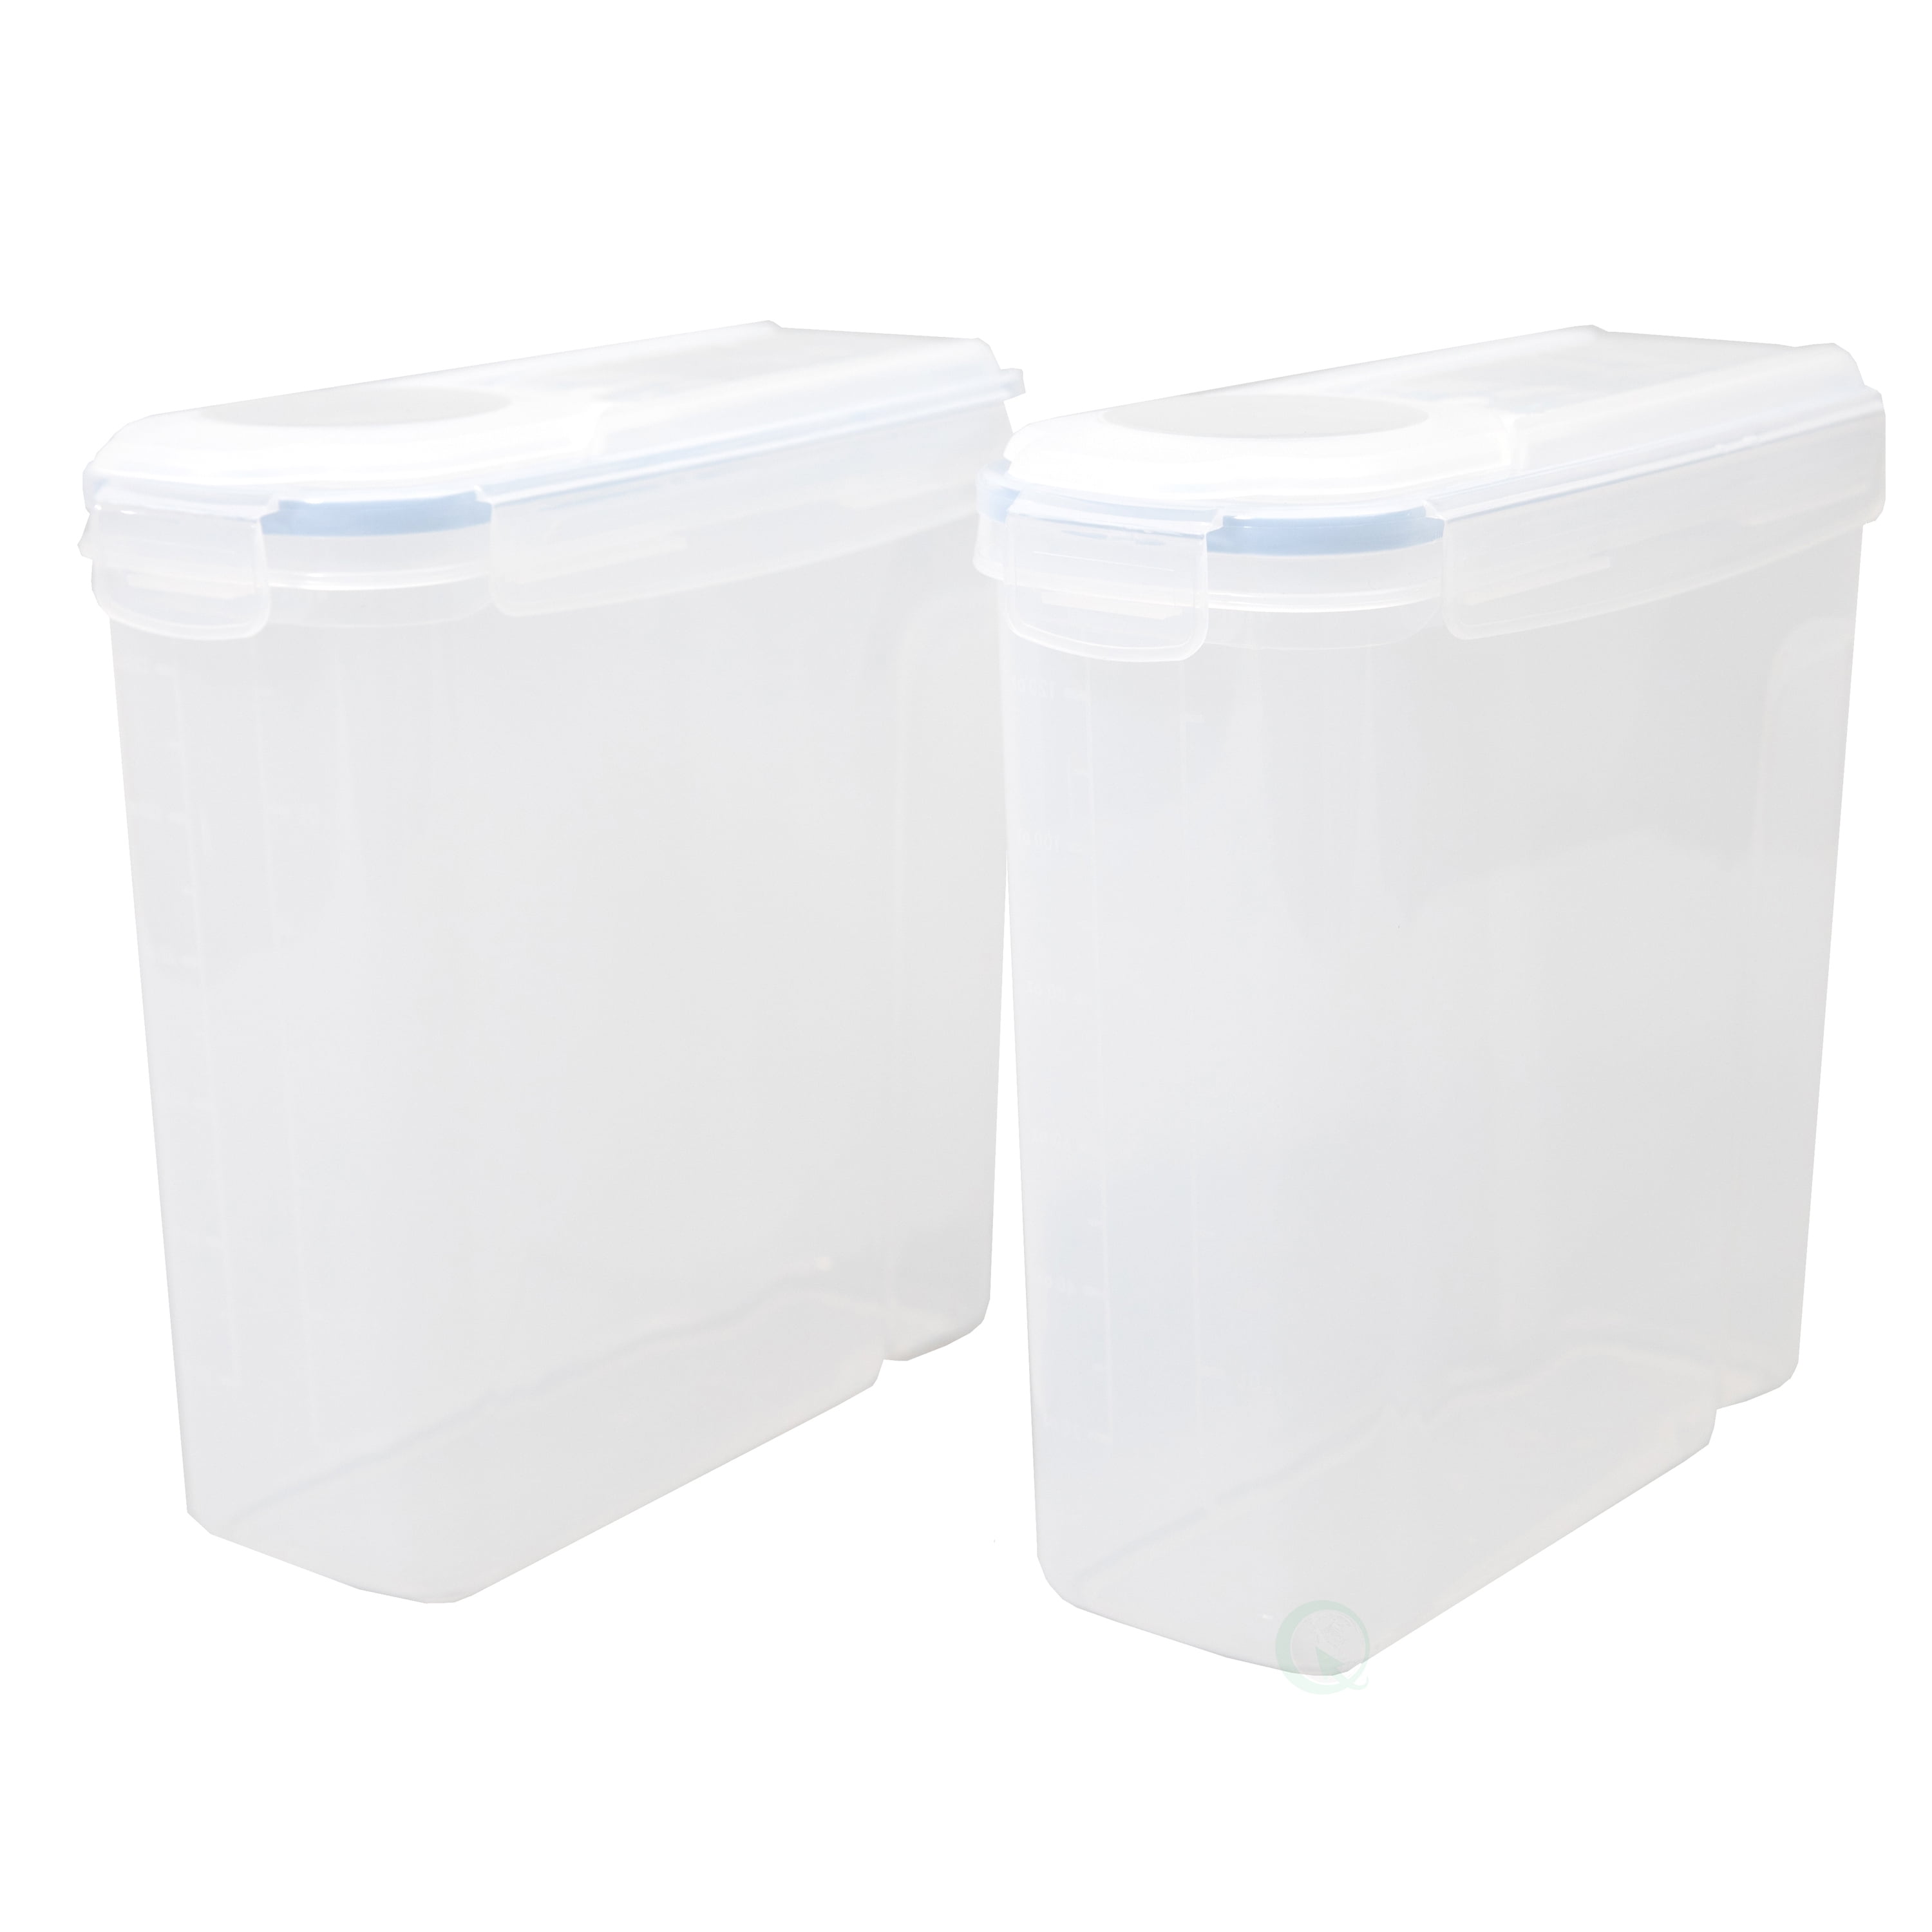 Basicwise Large BPA-Free Plastic Food Cereal Containers, Airtight Spout Lid Set of 2